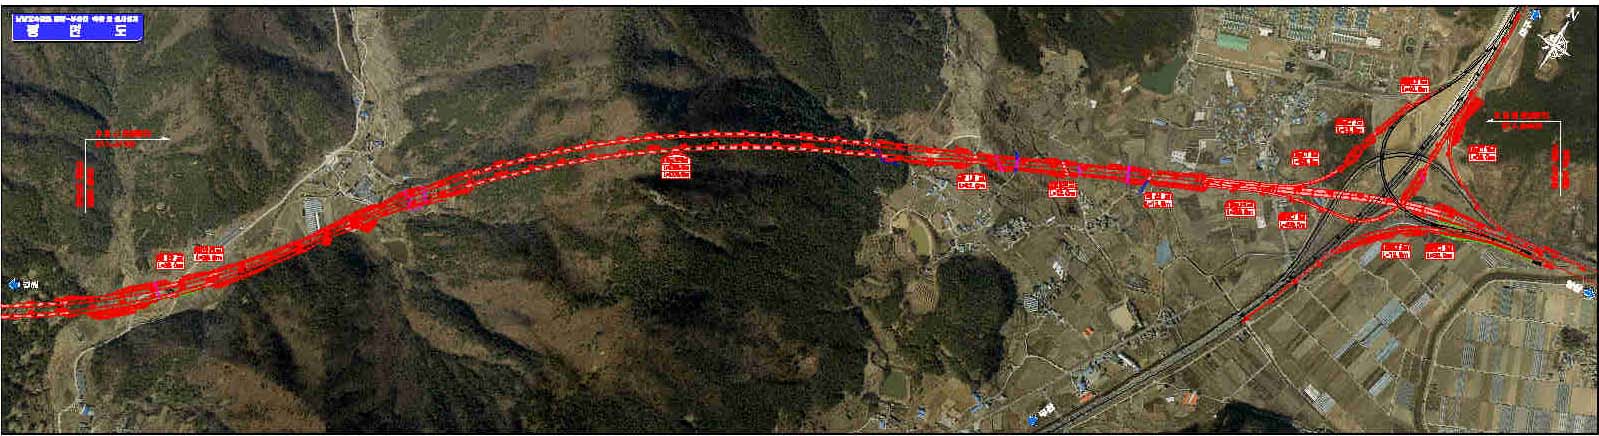 Detailed design for the widening of Namhae road between Naengjeong and Busan (Section 6)